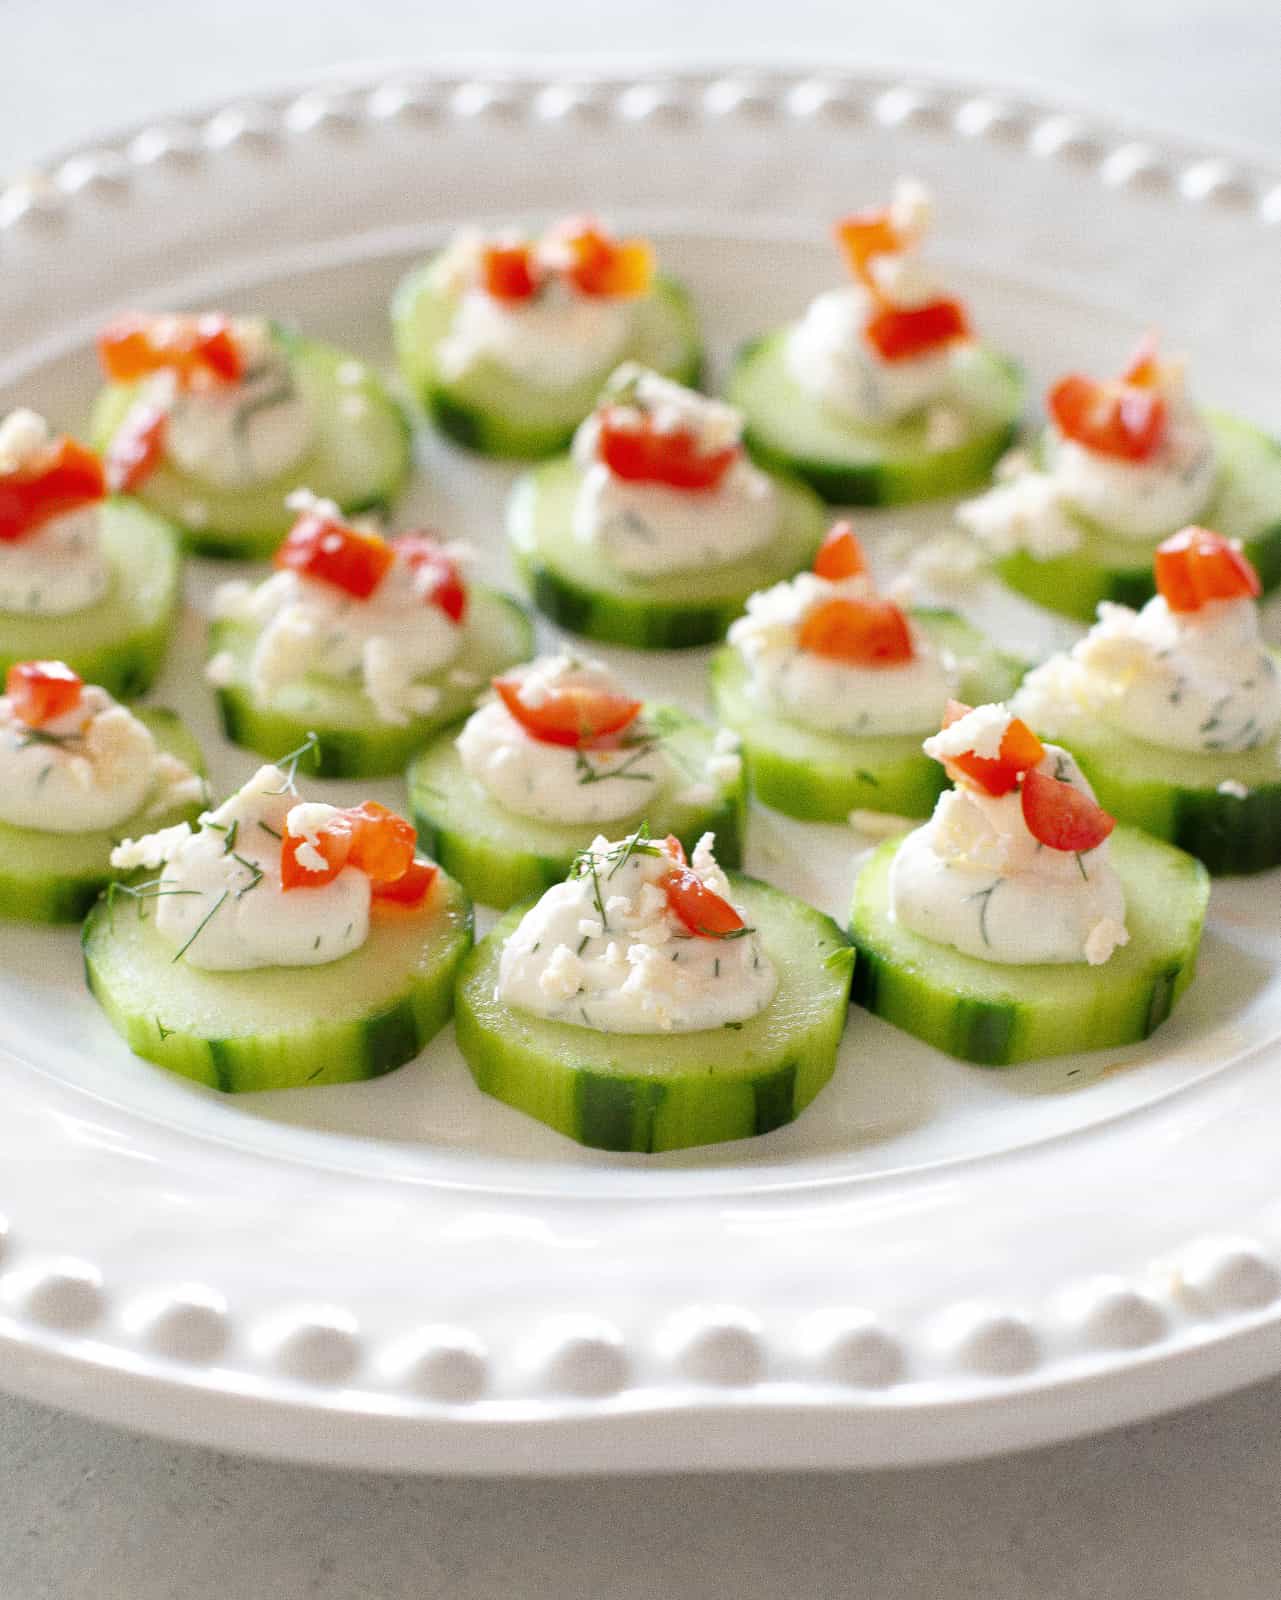 Easy Cucumber Dill Bites - The Girl Who Ate Everything